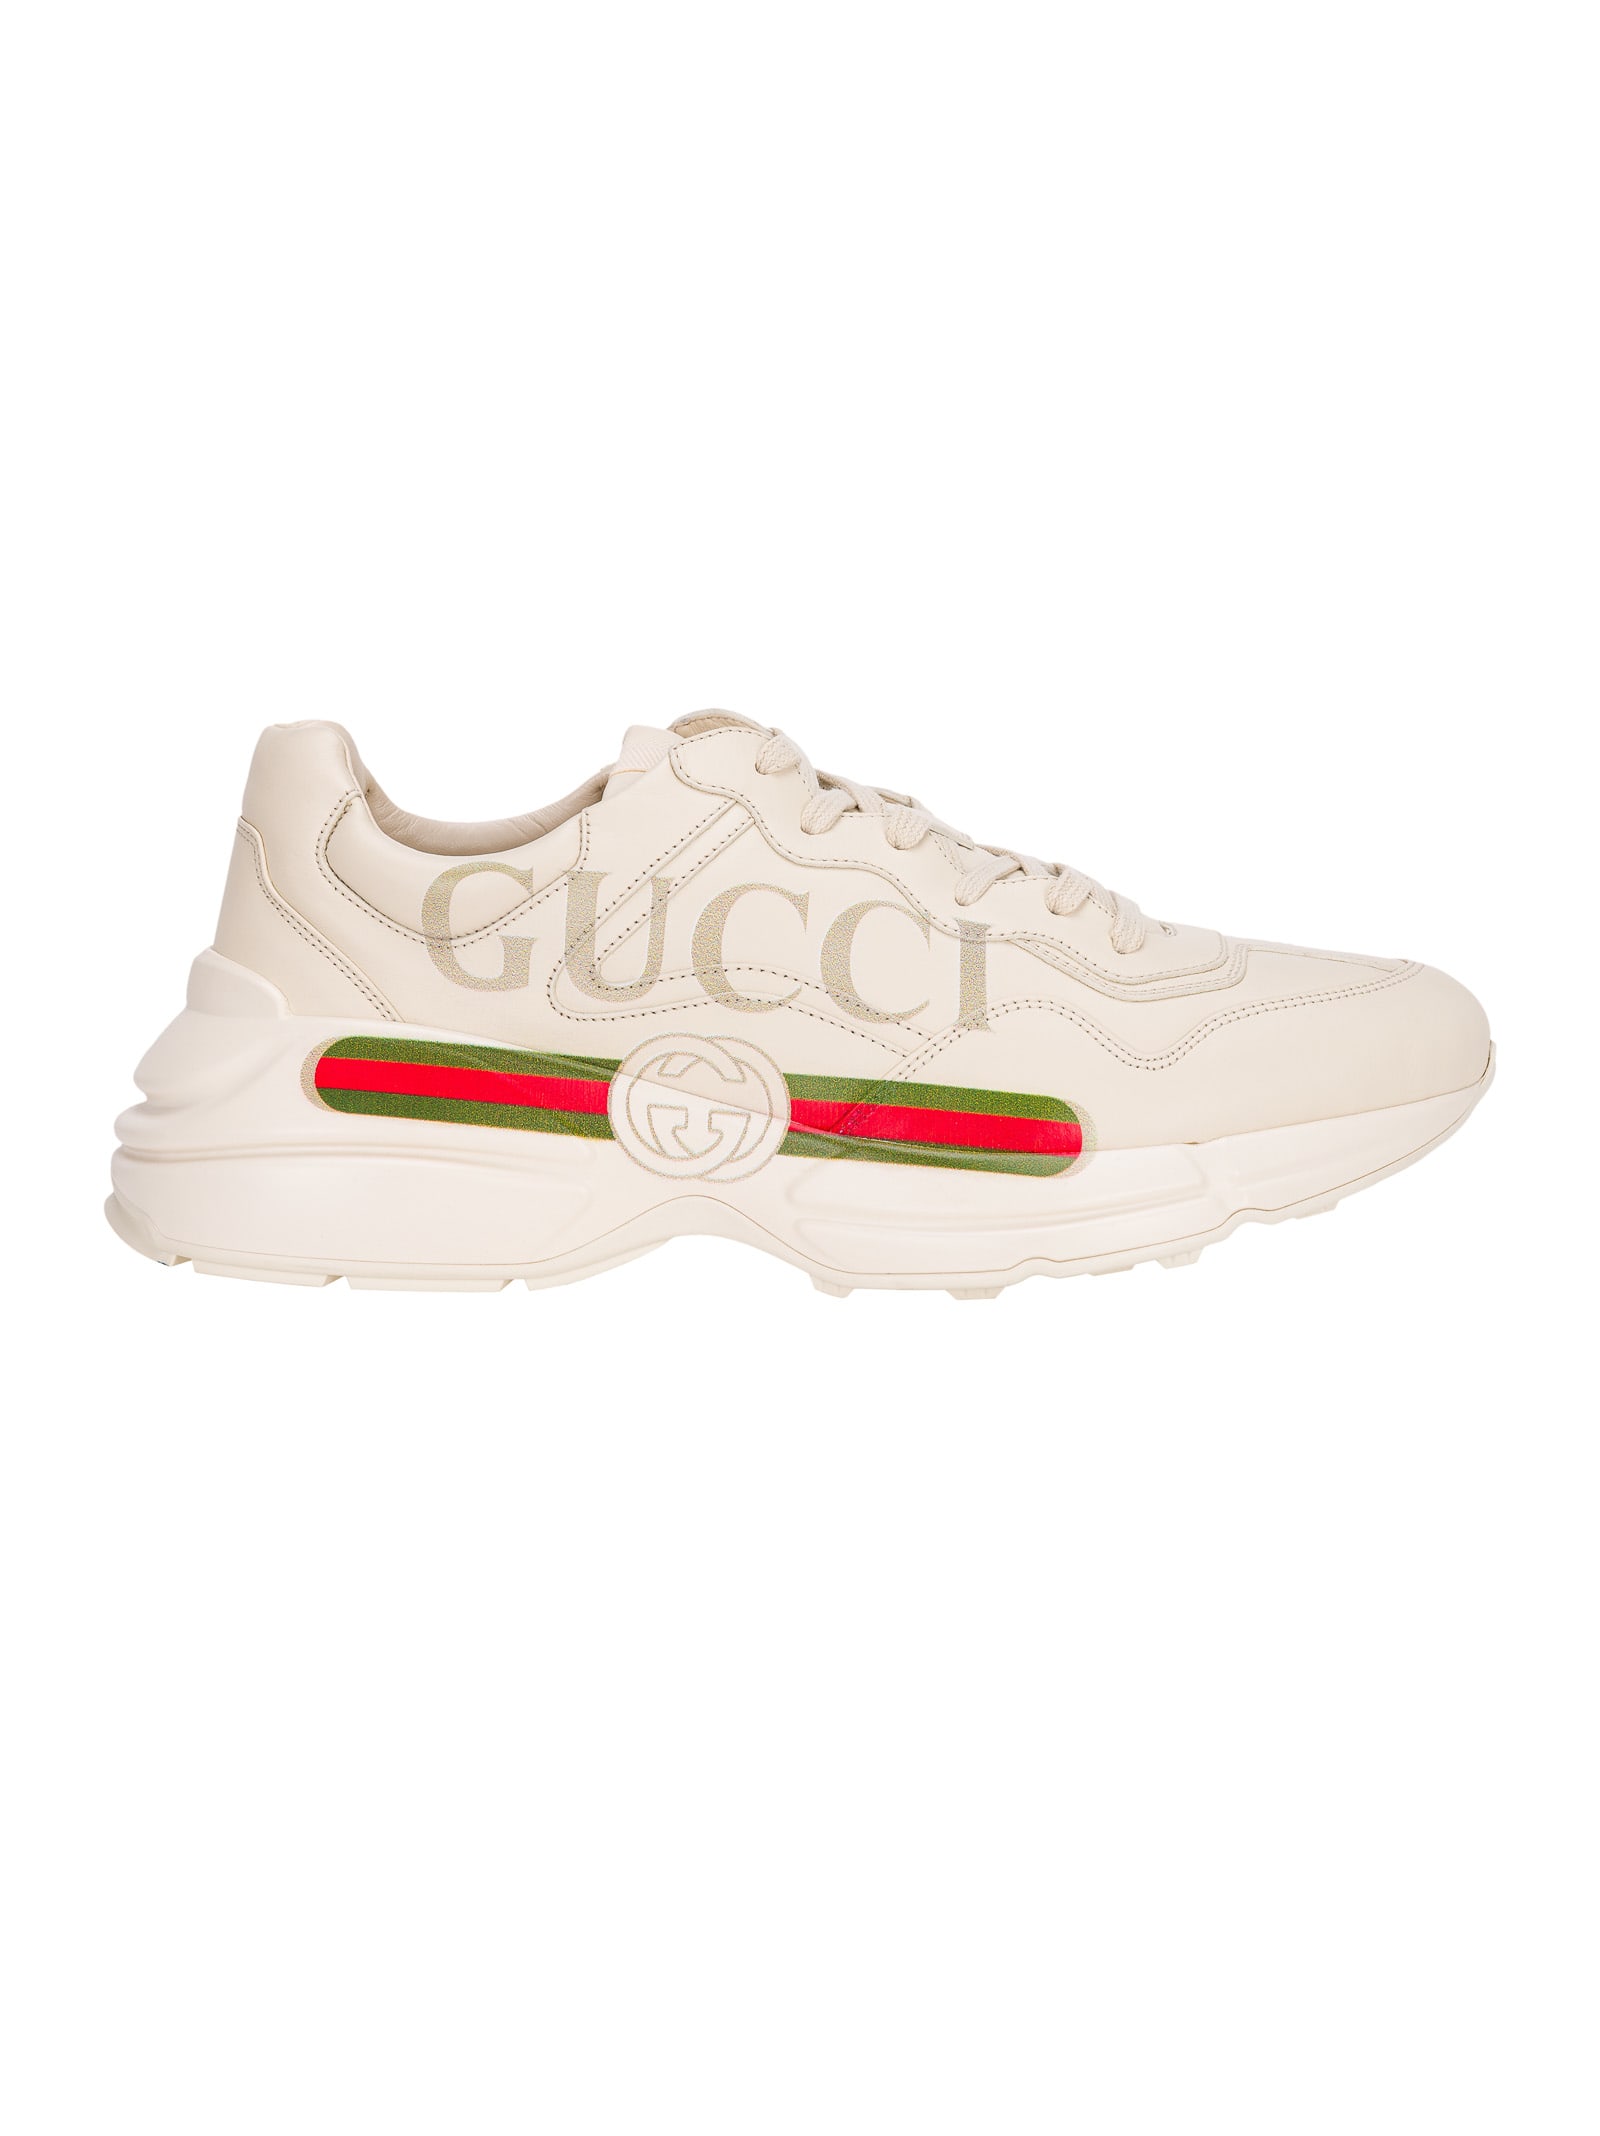 gucci shoes with tongue